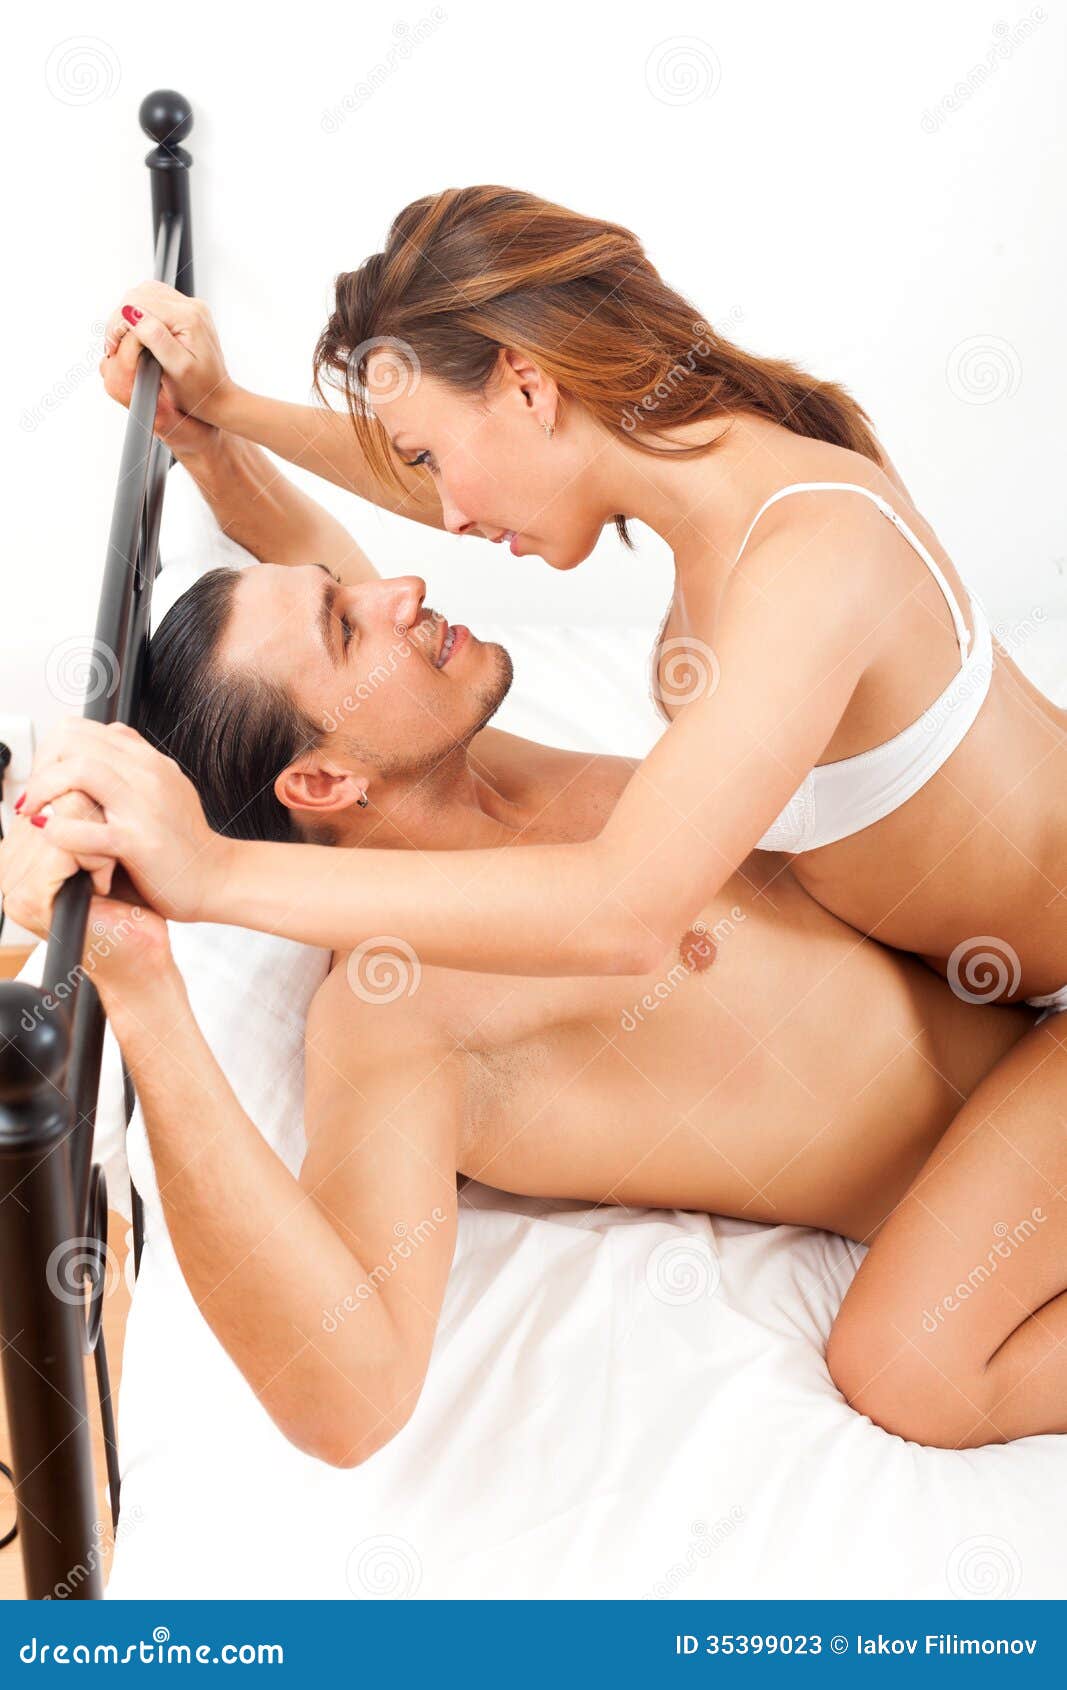 Playfull Adult Couple Having Sex on Bed in Bedroom Interior Stock Image image